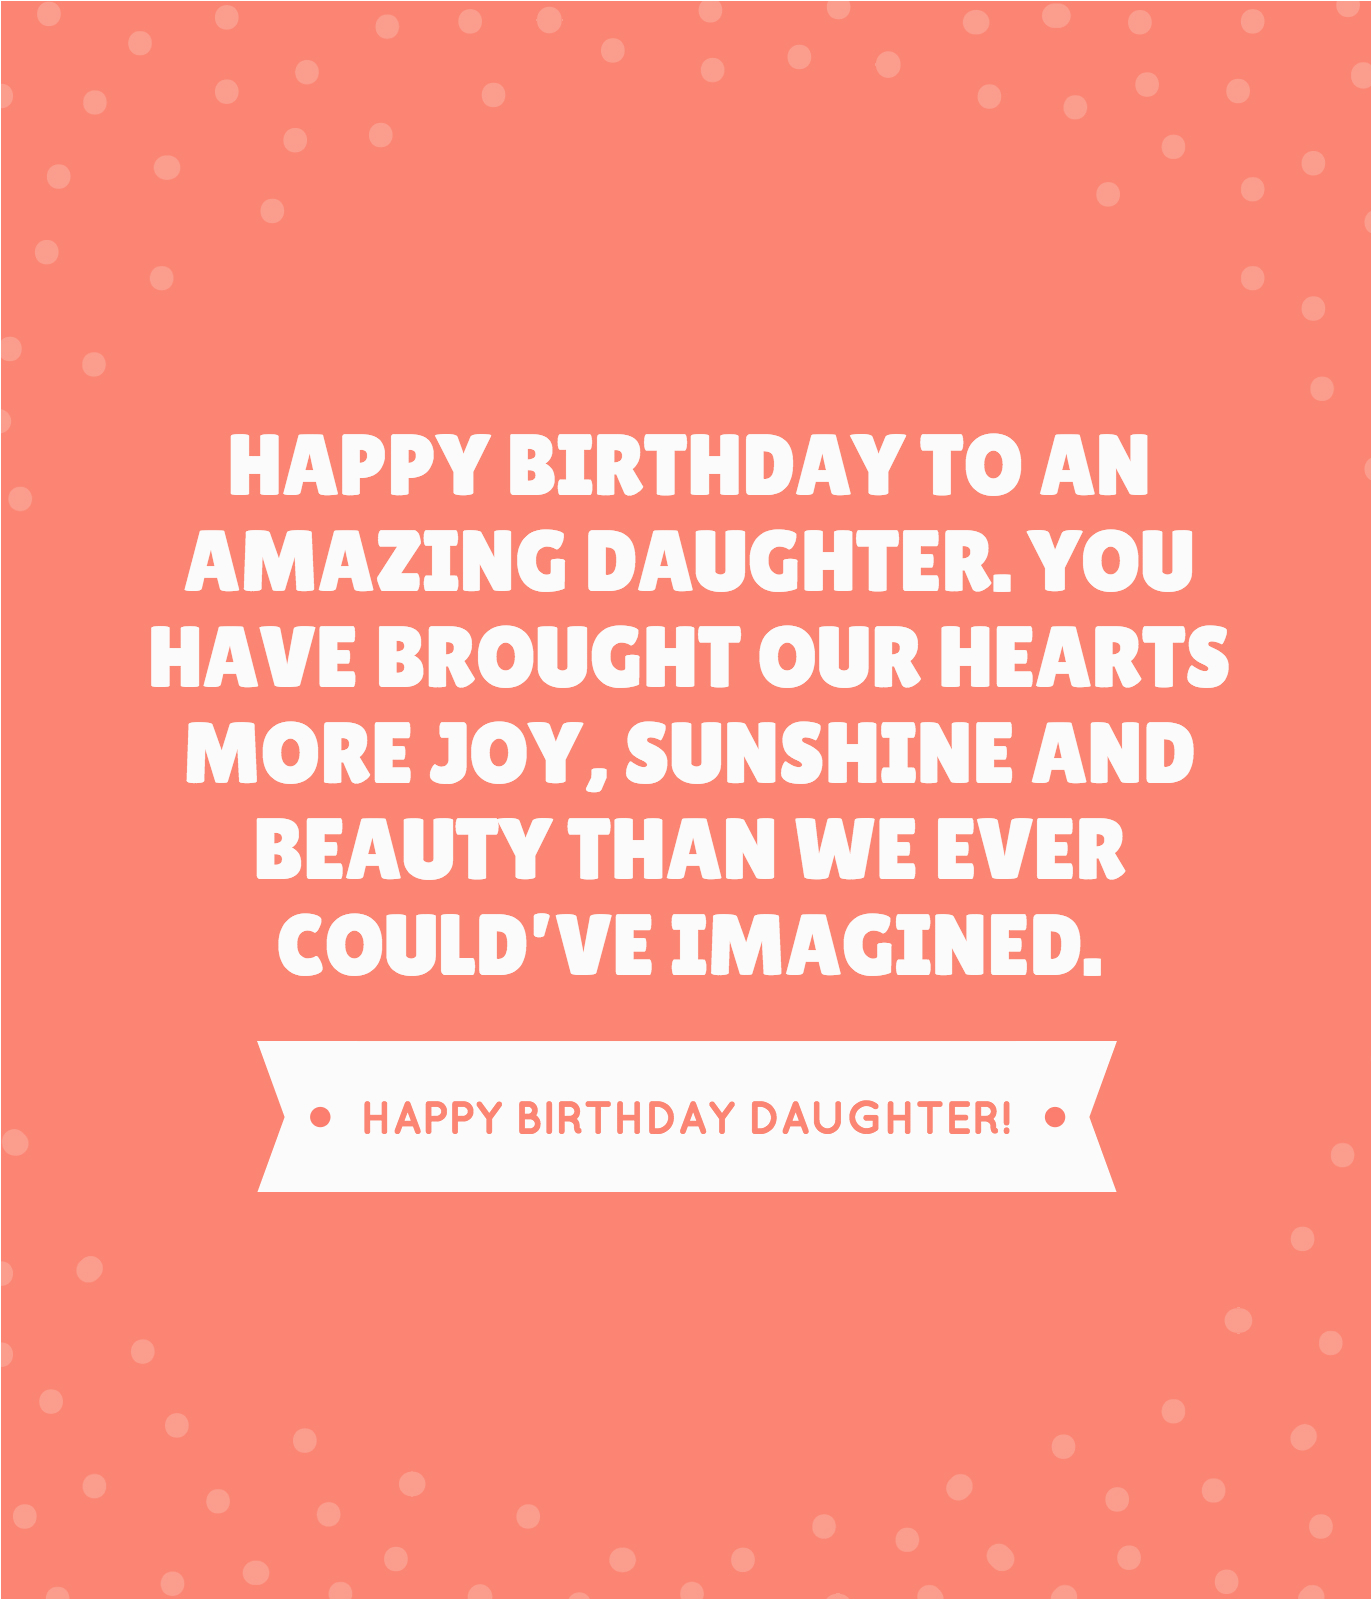 Birthday Quotes For Daughter - Homecare24